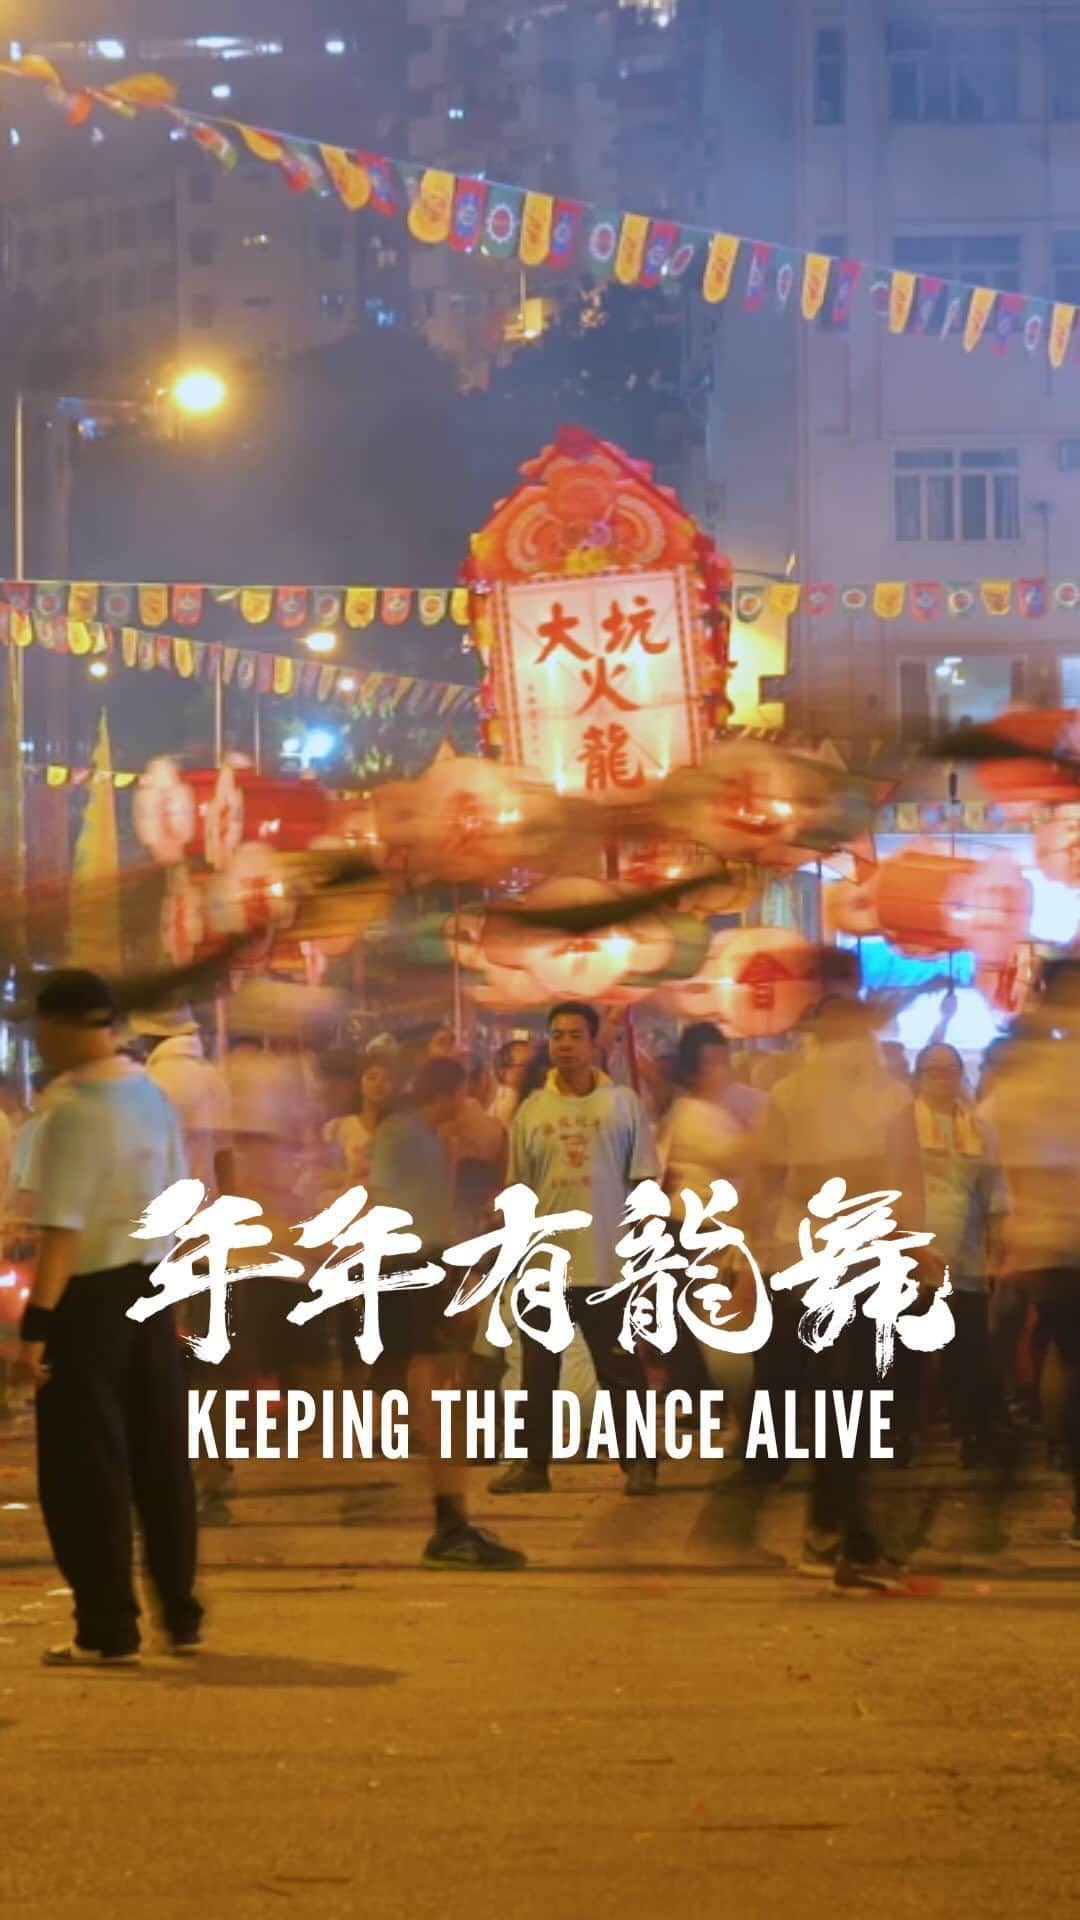 Discover Hong Kongのインスタグラム：「Tai Hang is a small community full of human interactions, but there’s more to it than that. For over 140 years, residents of this charming neighbourhood have maintained a unique tradition — the Tai Hang Fire Dragon Dance🐉. And the generations of Fire Dragon Dance teams share one wish: to keep the dragon dance alive!  Watch the full video on YouTube and experience the charm of the Tai Hang Fire Dragon Dance ▶️：https://youtu.be/IrjhLB774zE 👀  2023 Tai Hang Fire Dragon Dance 📅: 28 September 🕒: 8:15-10:30pm - Tai Hang, Causeway Bay 📅: 29 September 🕒: 8:15-10:30pm - Tai Hang, Causeway Bay 🕒 10:45pm-11:30pm - From Wun Sha Street to the Victoria Park 📅: 30 September 🕒: 8:15-10pm - Tai Hang, Causeway Bay  Find out more about the 144-year-old Tai Hang tradition before you go: bit.ly/46A2MBZ  下星期就係中秋節啦，當然不得不提擁有超過百年歷史嘅大坑舞火龍啦！大坑除咗係充滿人情味嘅小社區，仲承傳咗舞火龍🐉這一項獨特嘅傳統文化，而這全靠大坑人嘅堅持同火龍隊成員嘅共同心願——「年年有龍舞」🐲。   即到YouTube觀看完整版視頻，感受大坑舞火龍嘅魅力 ▶️：https://youtu.be/IrjhLB774zE 👀  2023年大坑舞火龍詳情： 📅: 9月28日 🕒: 晚上8時15分至10時30分，銅鑼灣大坑 📅: 9月29日 🕒: 晚上8時15分至10時30分，銅鑼灣大坑 🕒: 晚上10時45分至11時30分，大坑浣紗街出發至維多利亞公園  📅: 9月30日 🕒: 晚上8時15分至10時正，銅鑼灣大坑  到場觀賞表演之前，不妨先了解下呢項擁有144年歷史嘅大坑文化：bit.ly/3ZkLWV7  #TaiHangFireDragonDance #HelloHongKong #DiscoverHongKong」